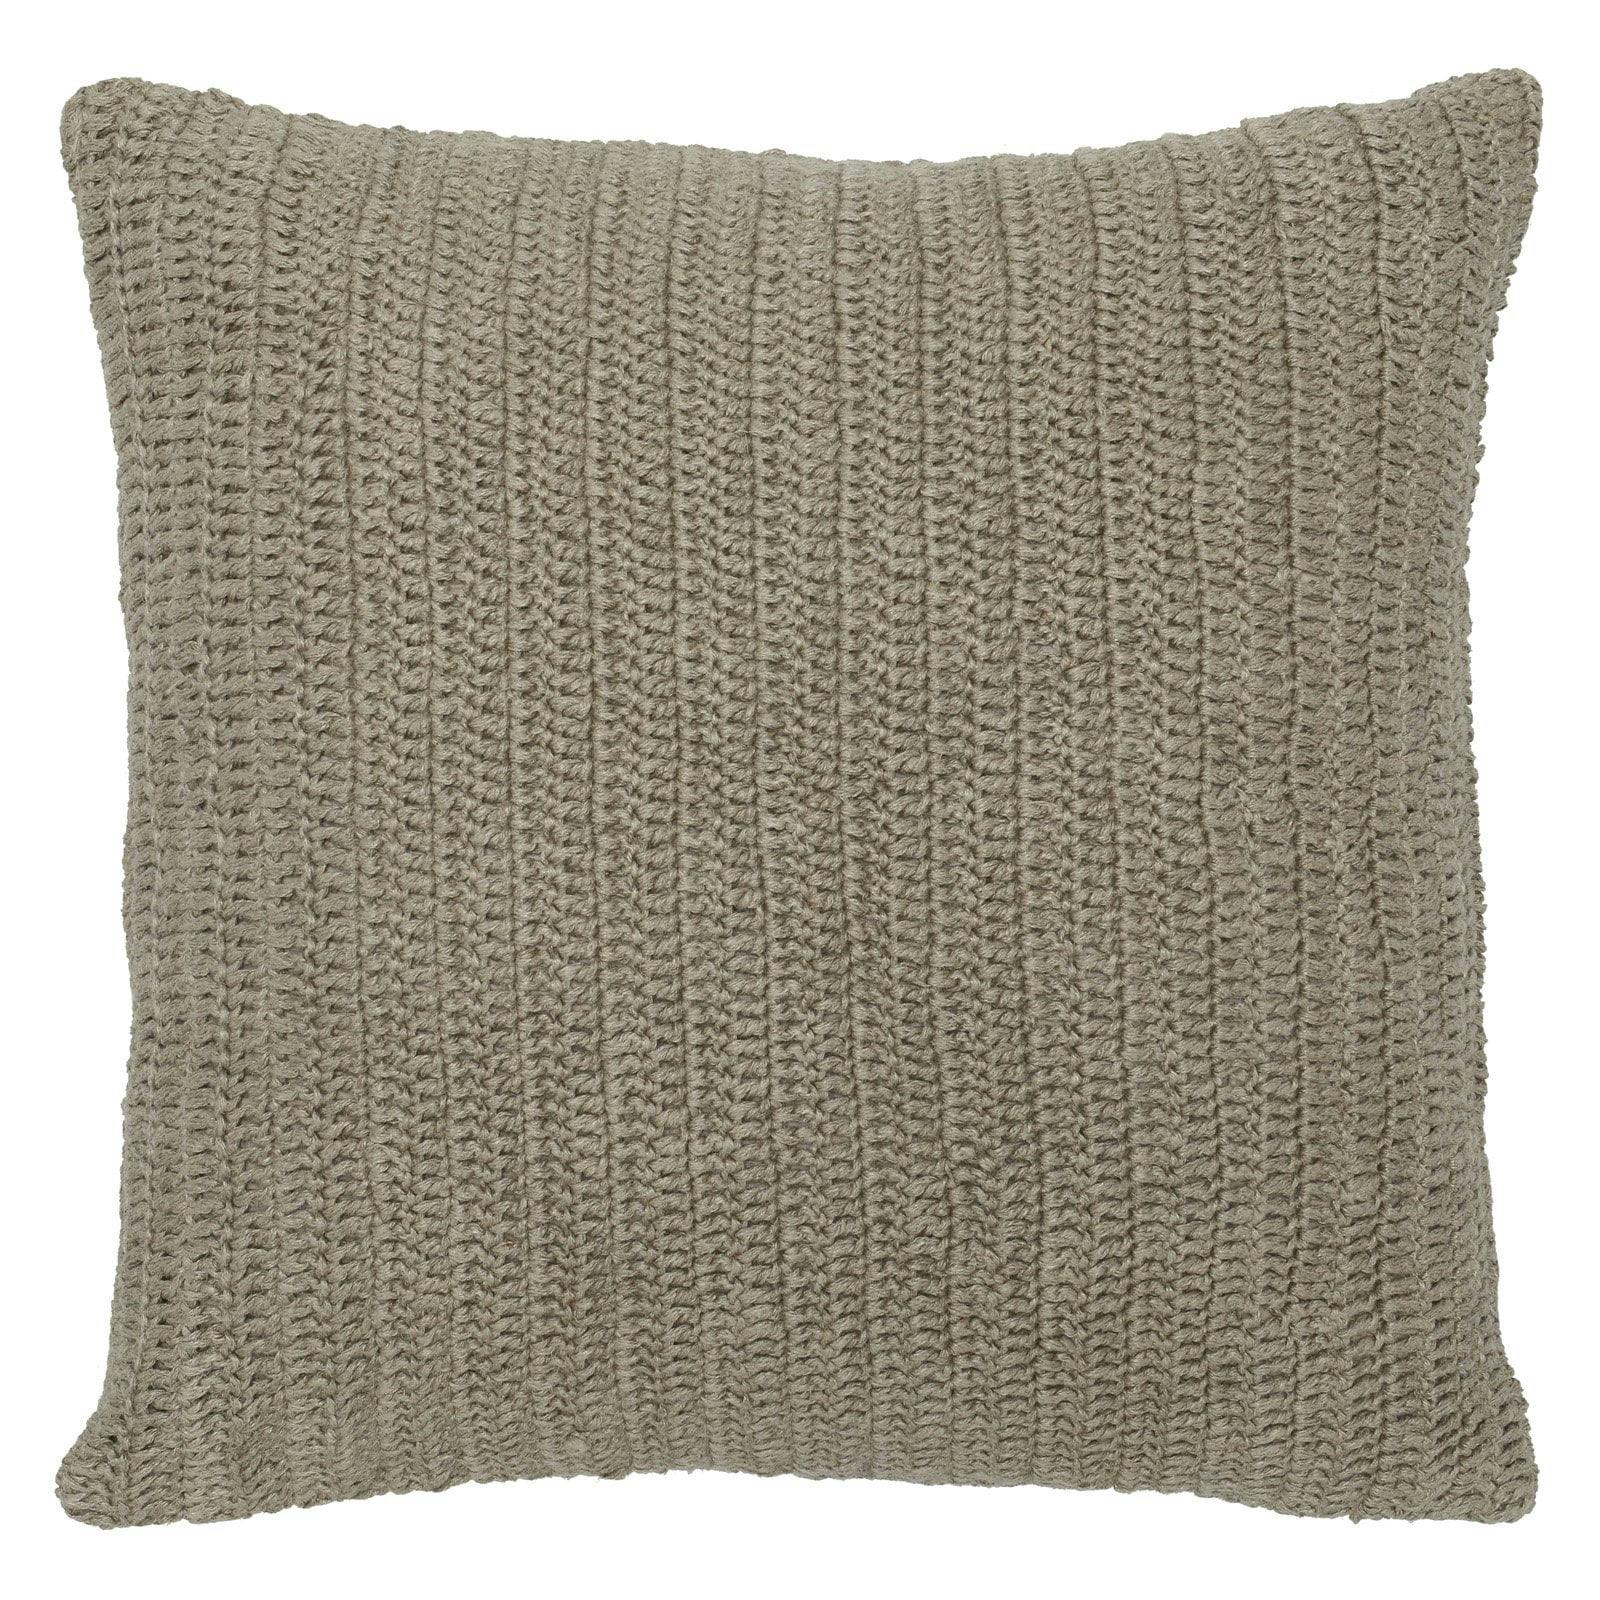 Artisanal Square Knitted Throw Pillow in Natural - 22" x 22"